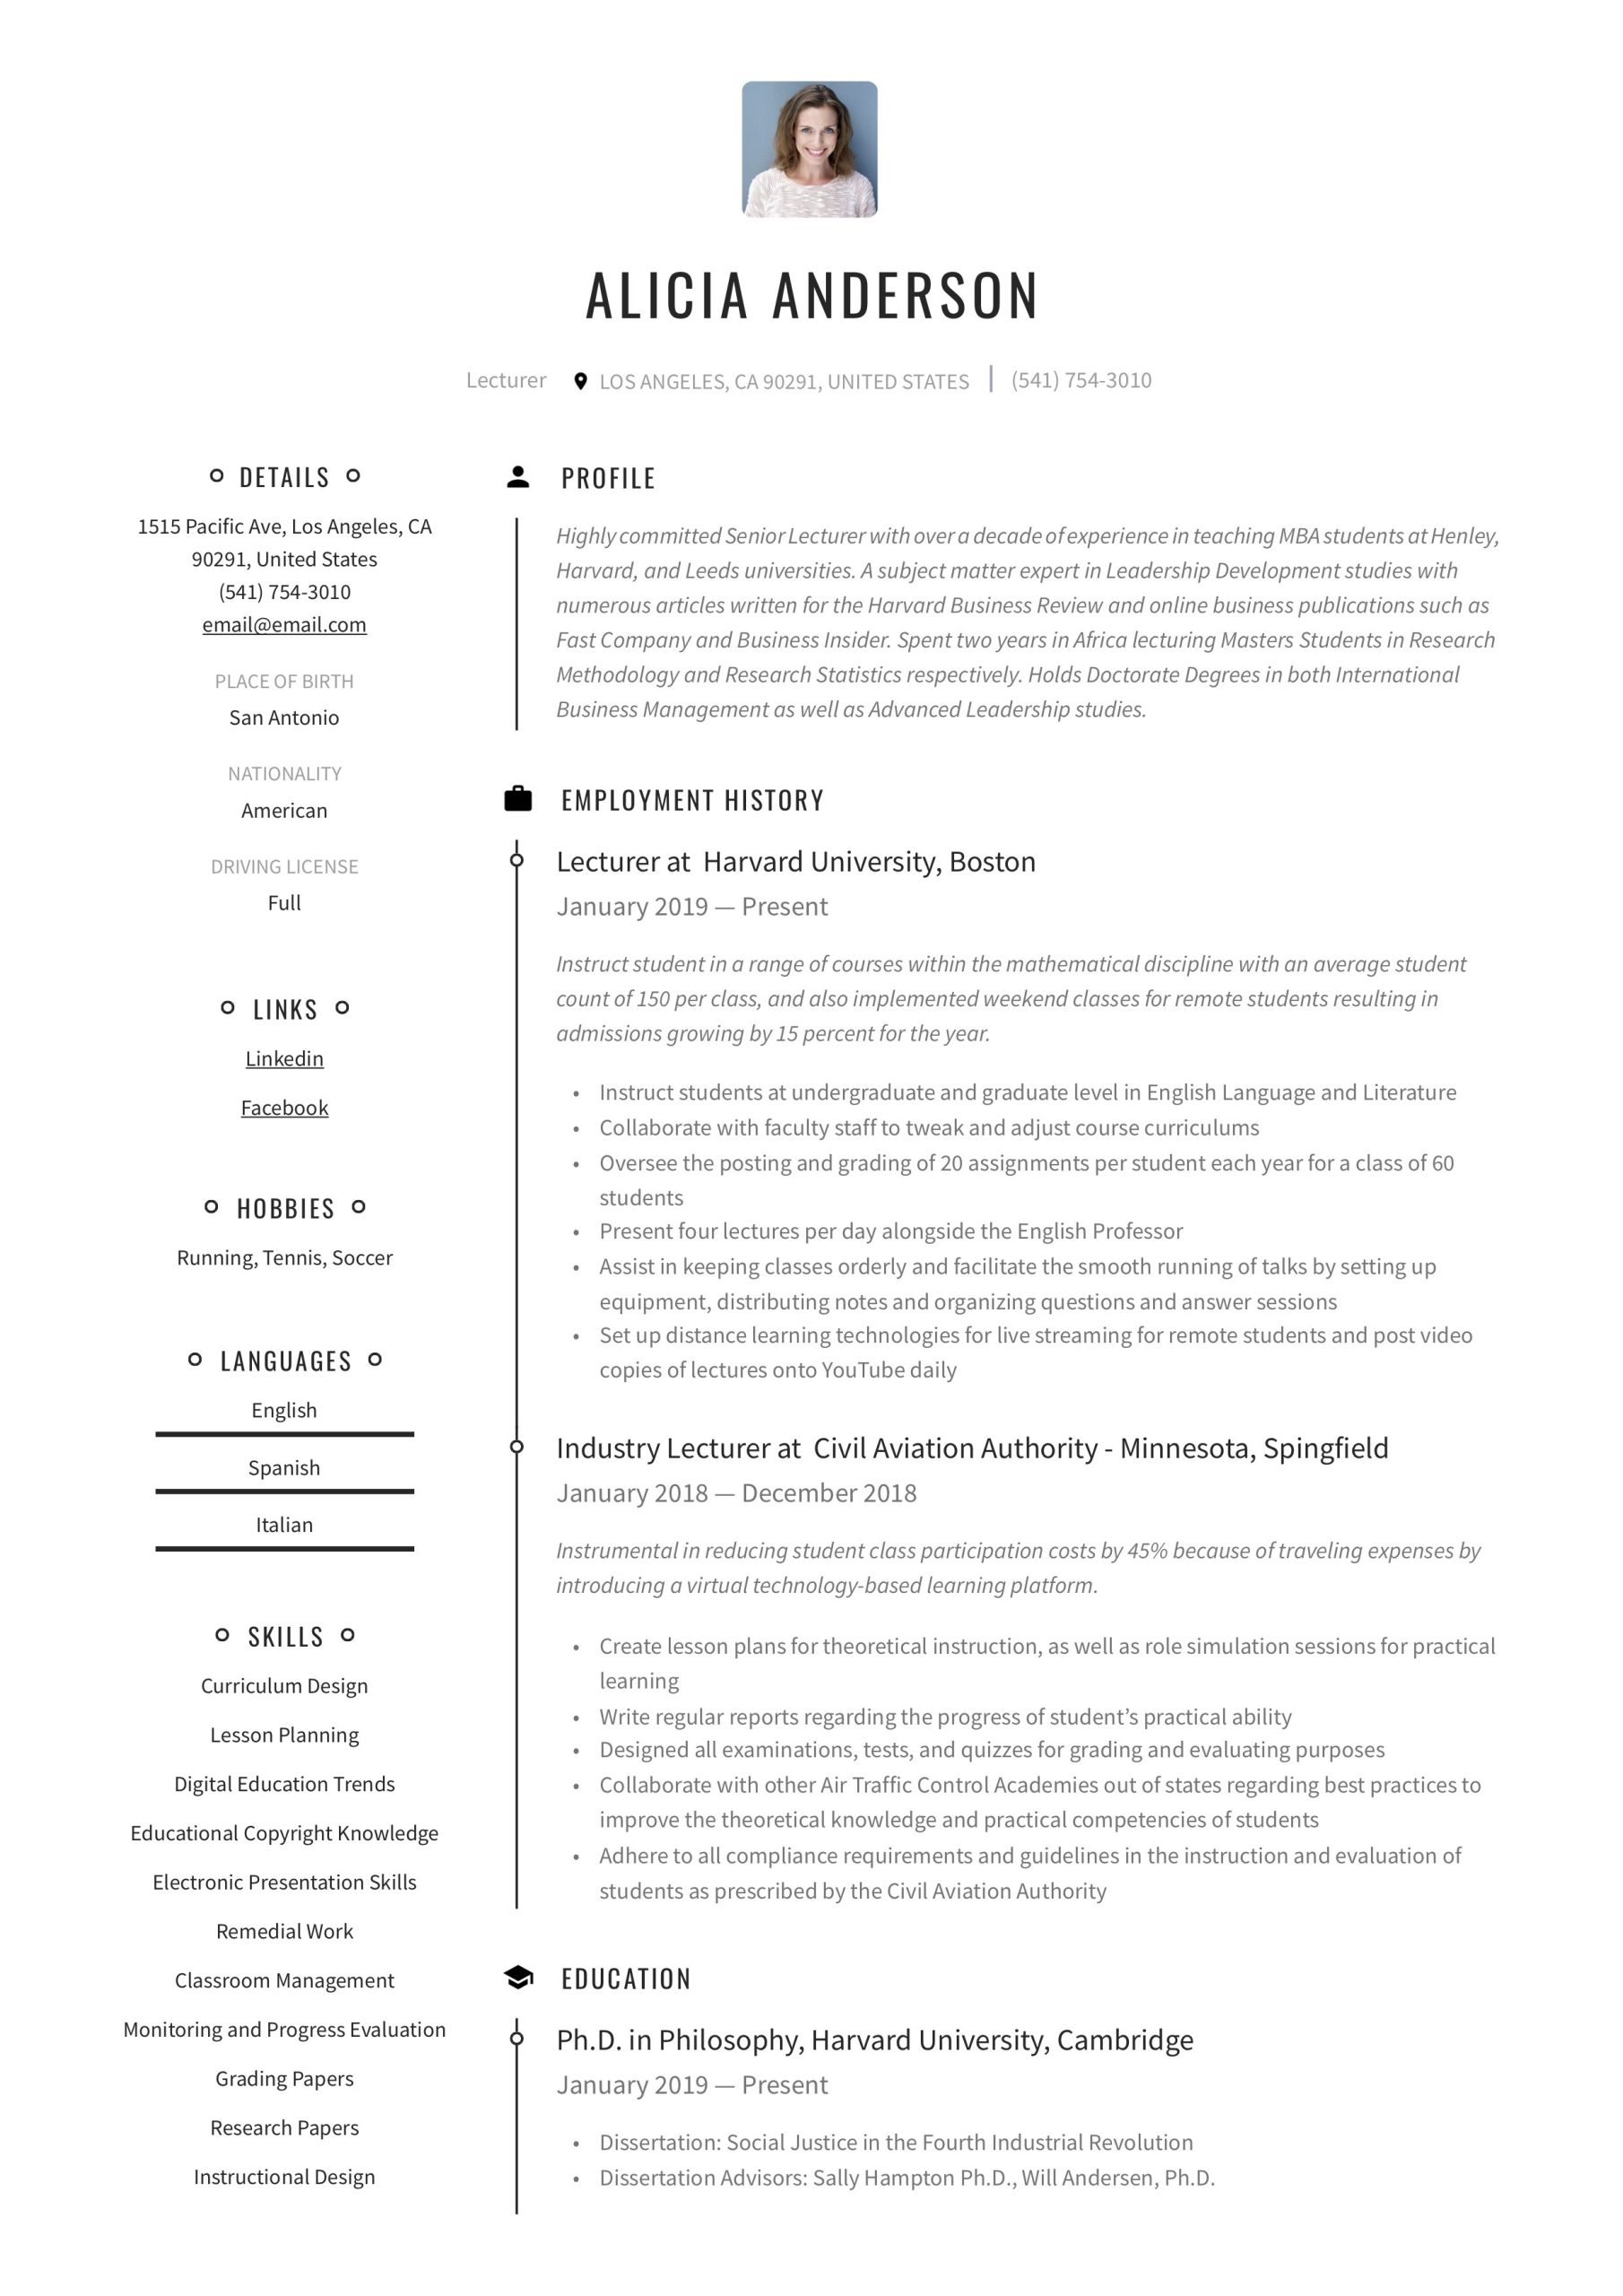 Resume Samples for College Instructor Positions Lecturer Resume & Writing Guide  18 Free Examples 2020